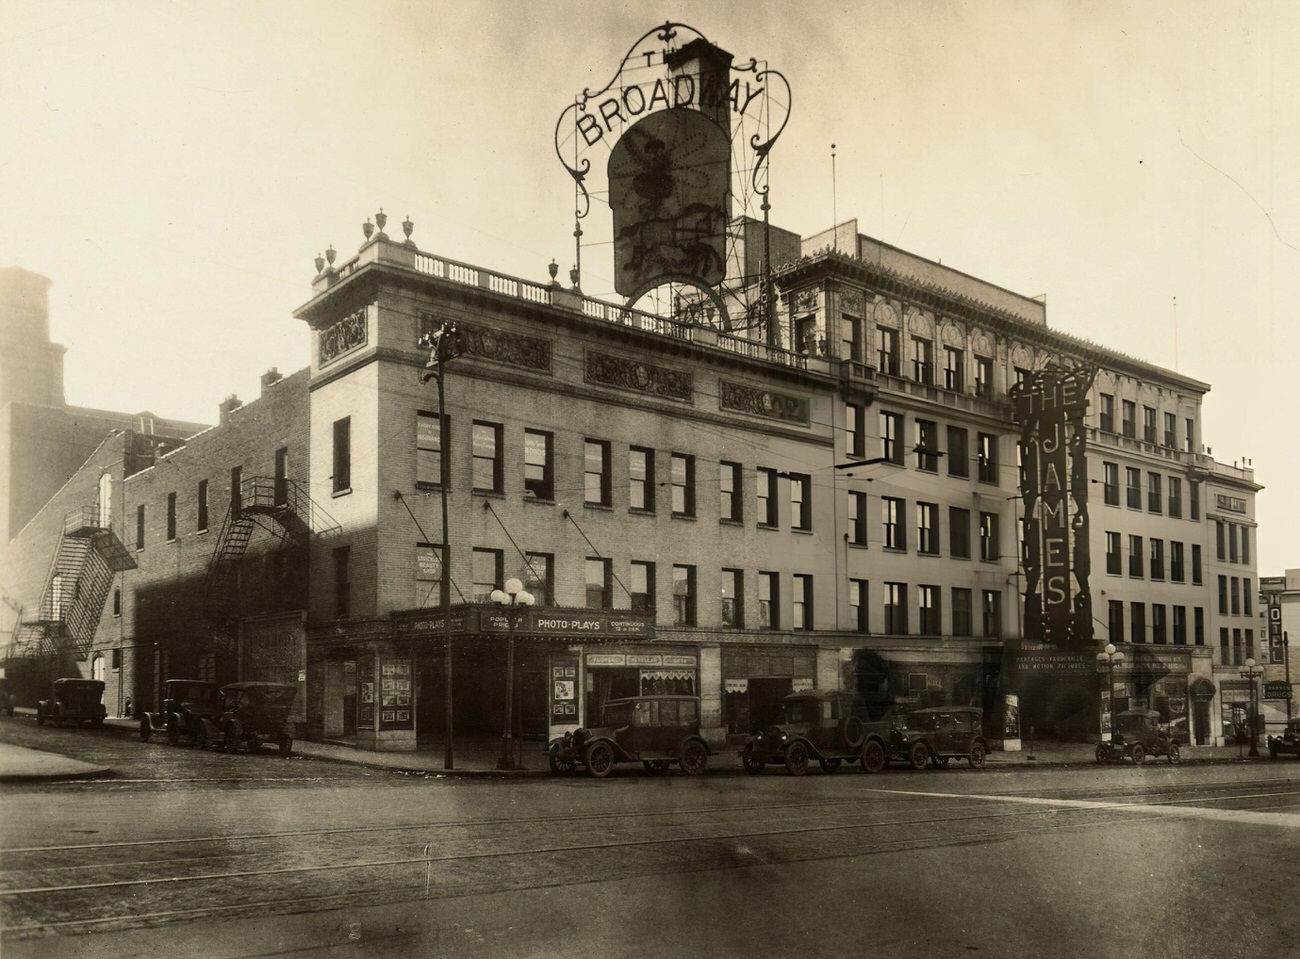 General view of the James Theater and businesses at the Broadway Building, Columbus, 1910s